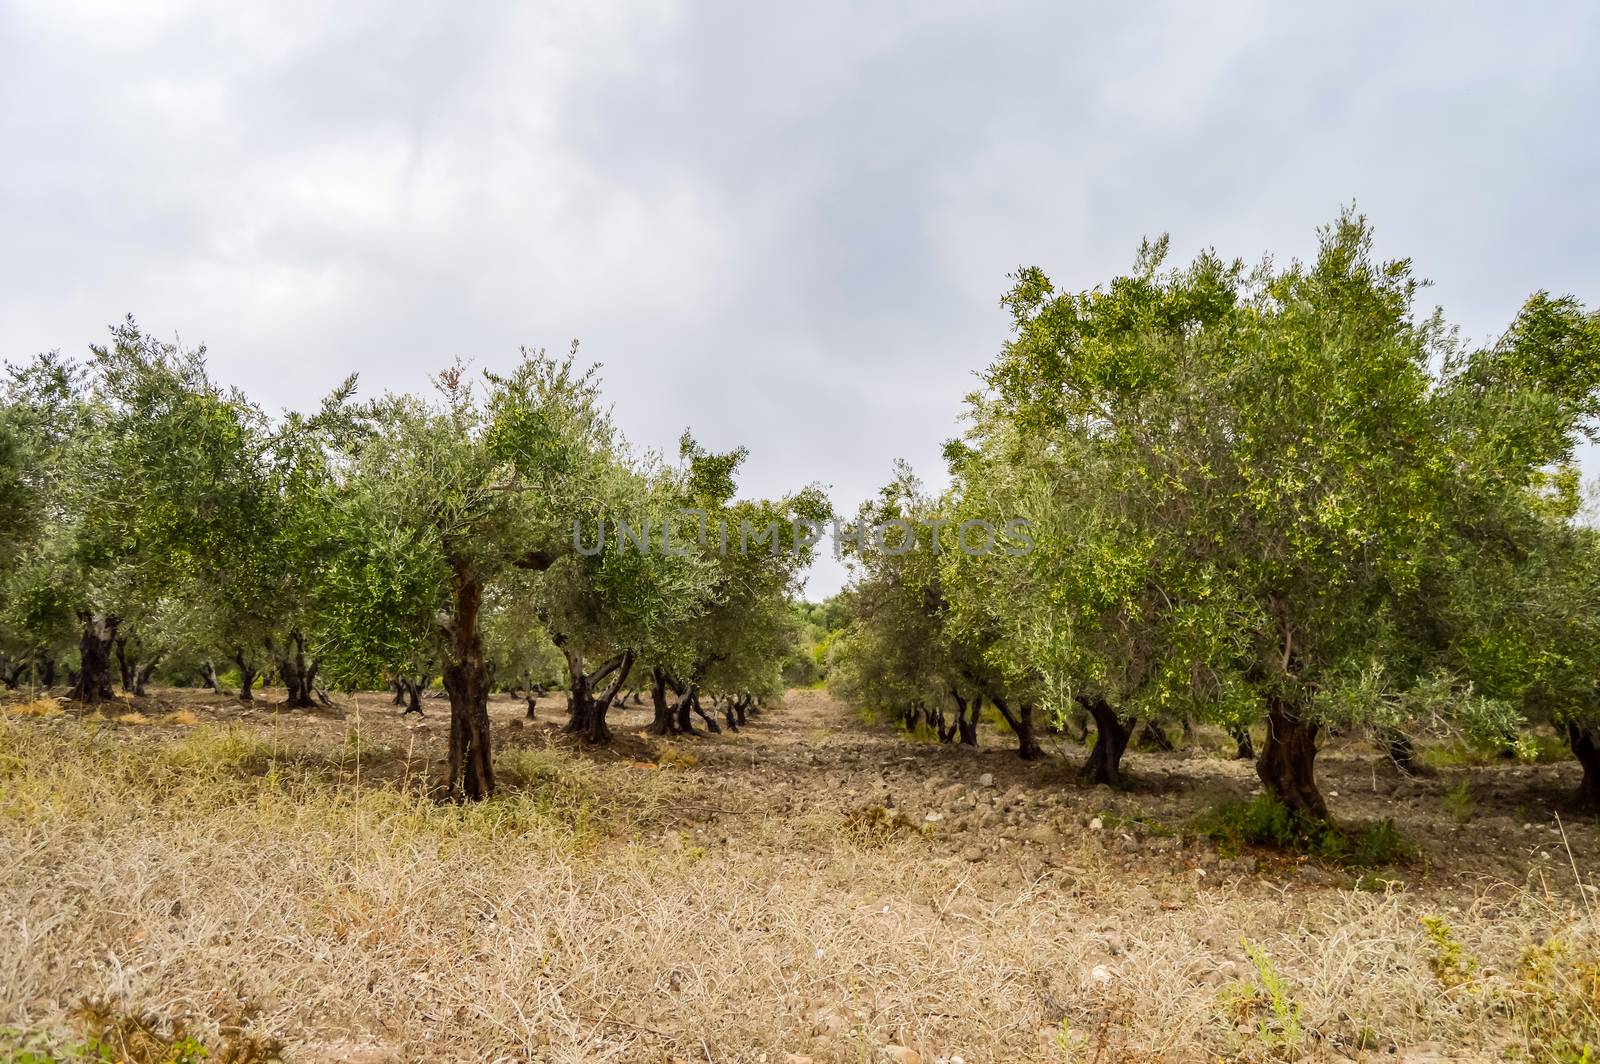 Olive plantation in Crete, the island of olive trees, as far as your eye can see there are only olive trees